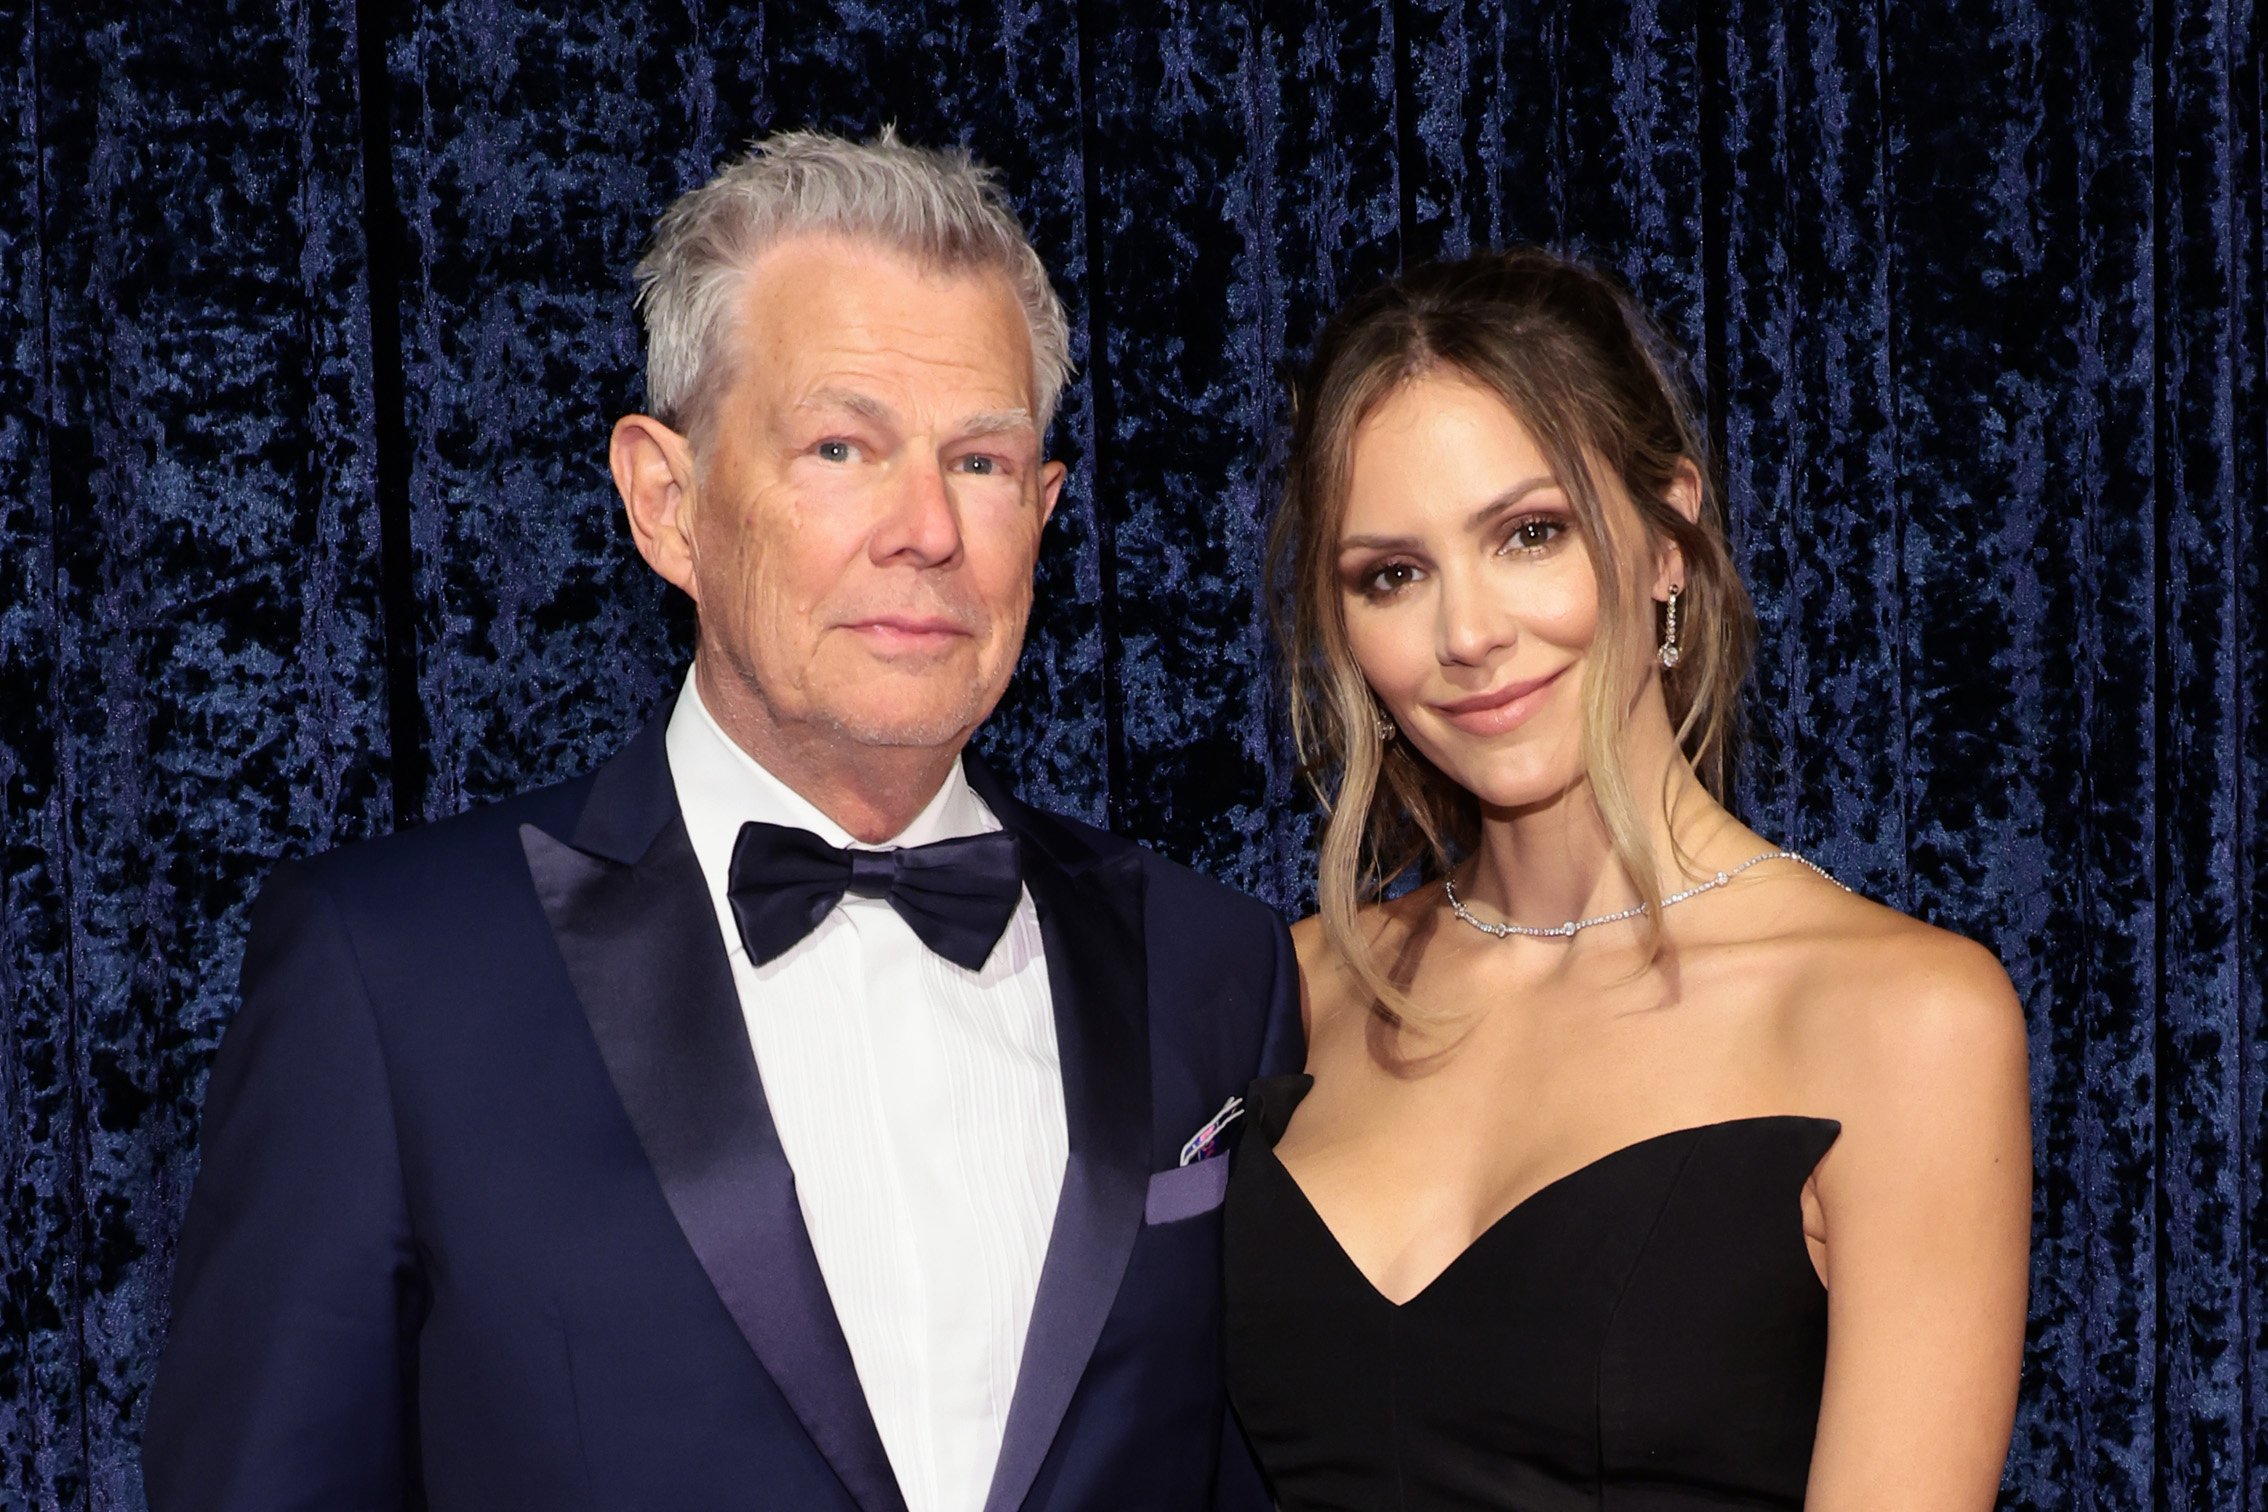 Musician David Foster and actress Katharine McPhee attend the Clive Davis 90th Birthday Celebration at Casa Cipriani on April 6, 2022 in New York City ┃Source: Getty Images